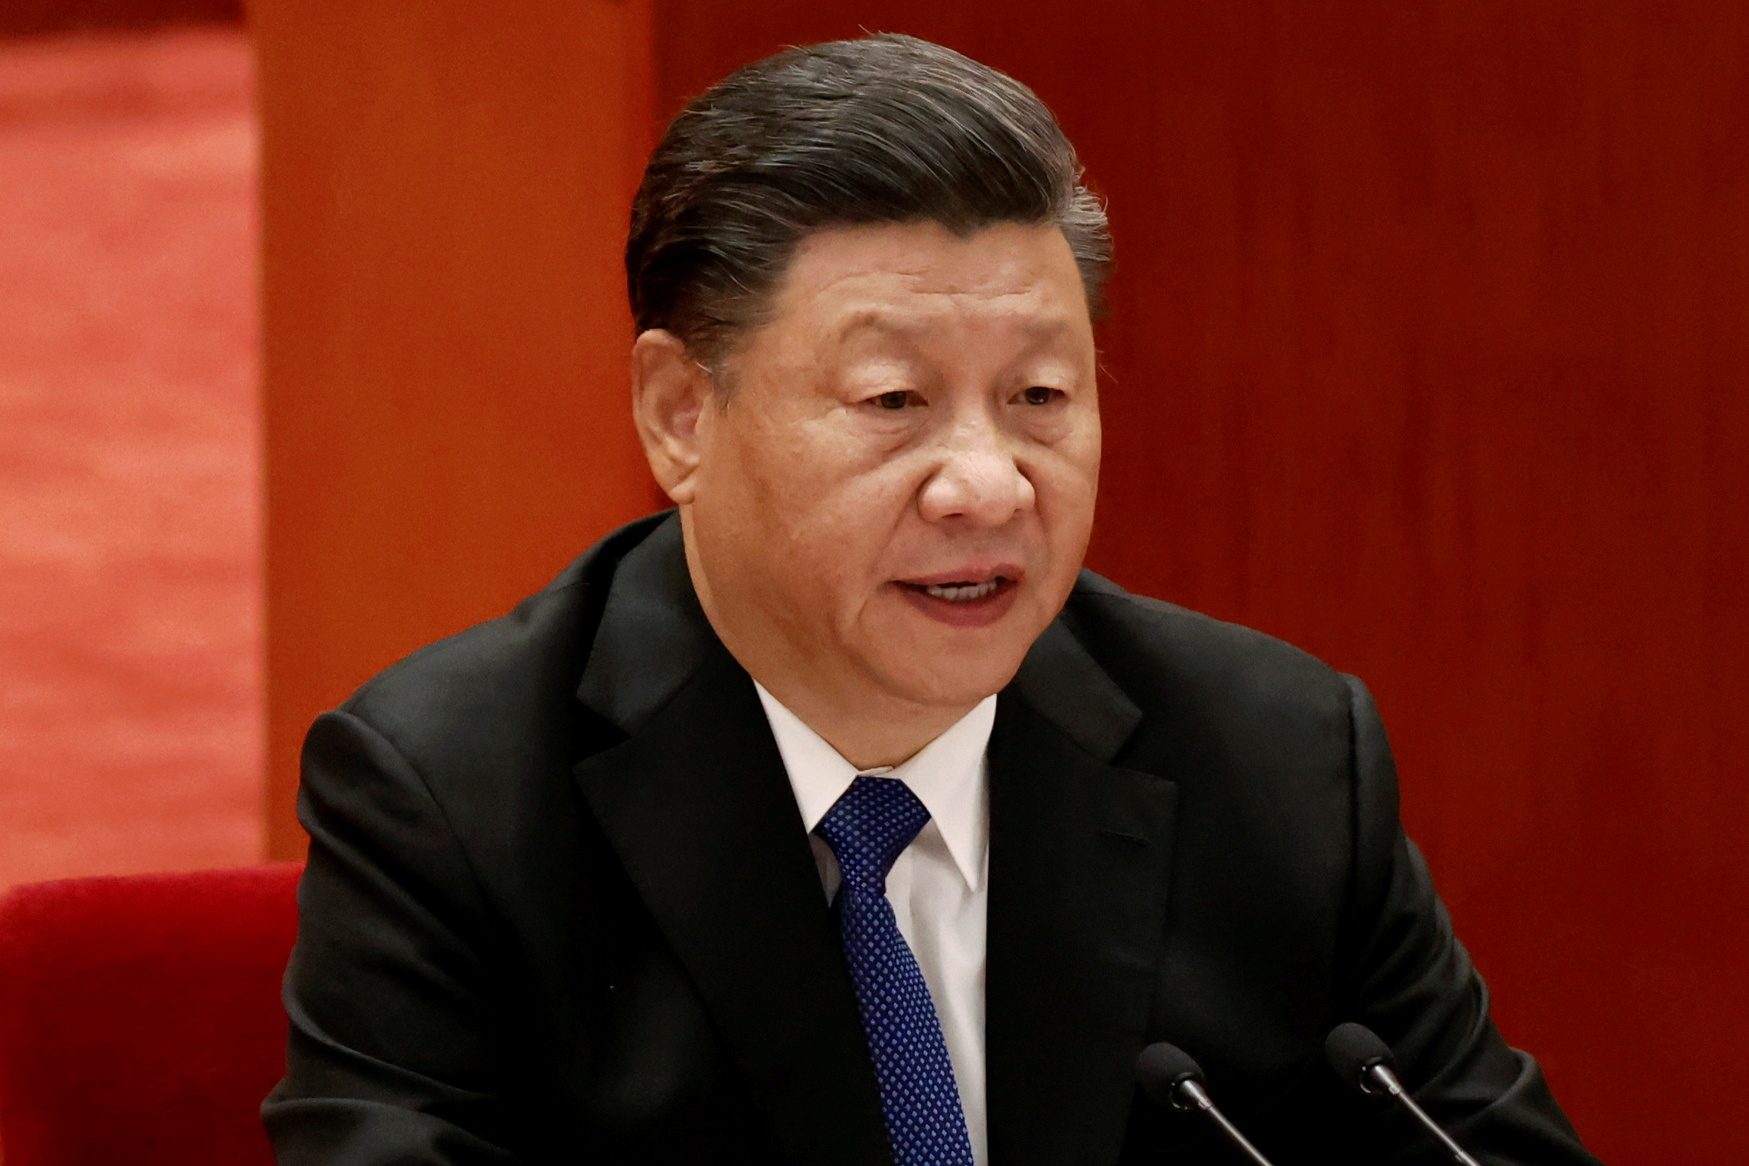 Xi’s call to win tech race points to new wave of Chinese state-led spending